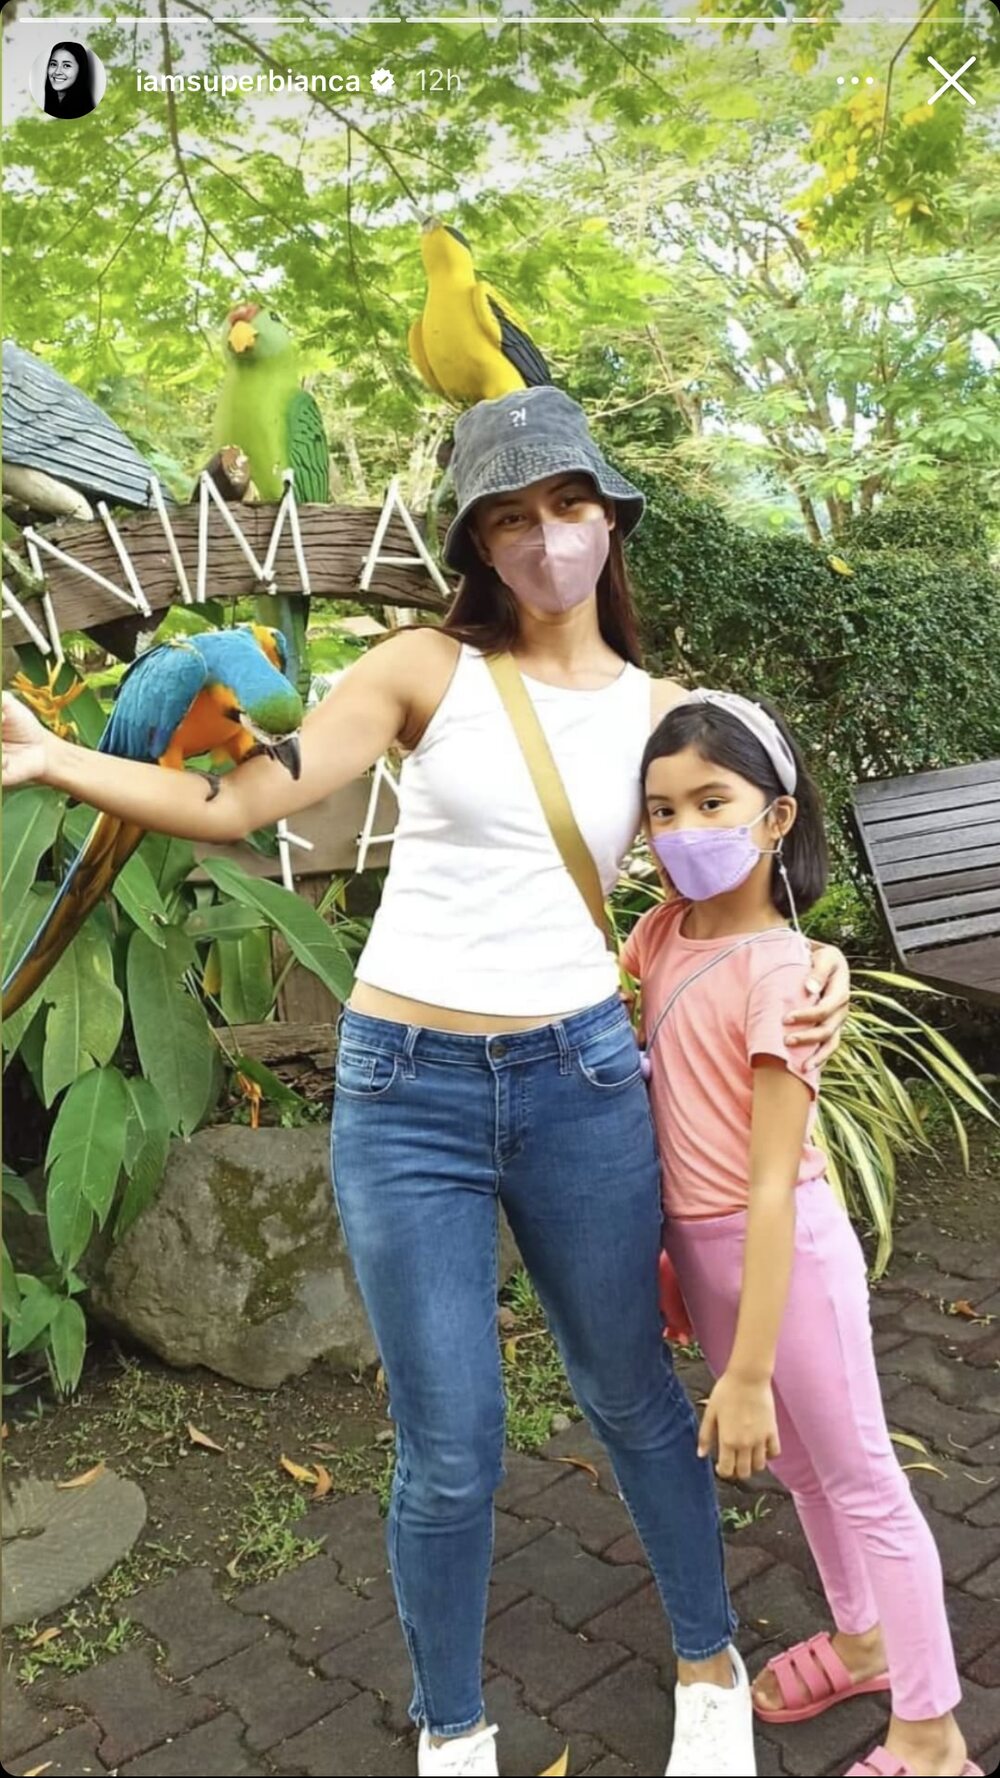 (L-R) Bianca Gonzalez and Lucia Martine Intal strike a pose with parrots at the animal farm